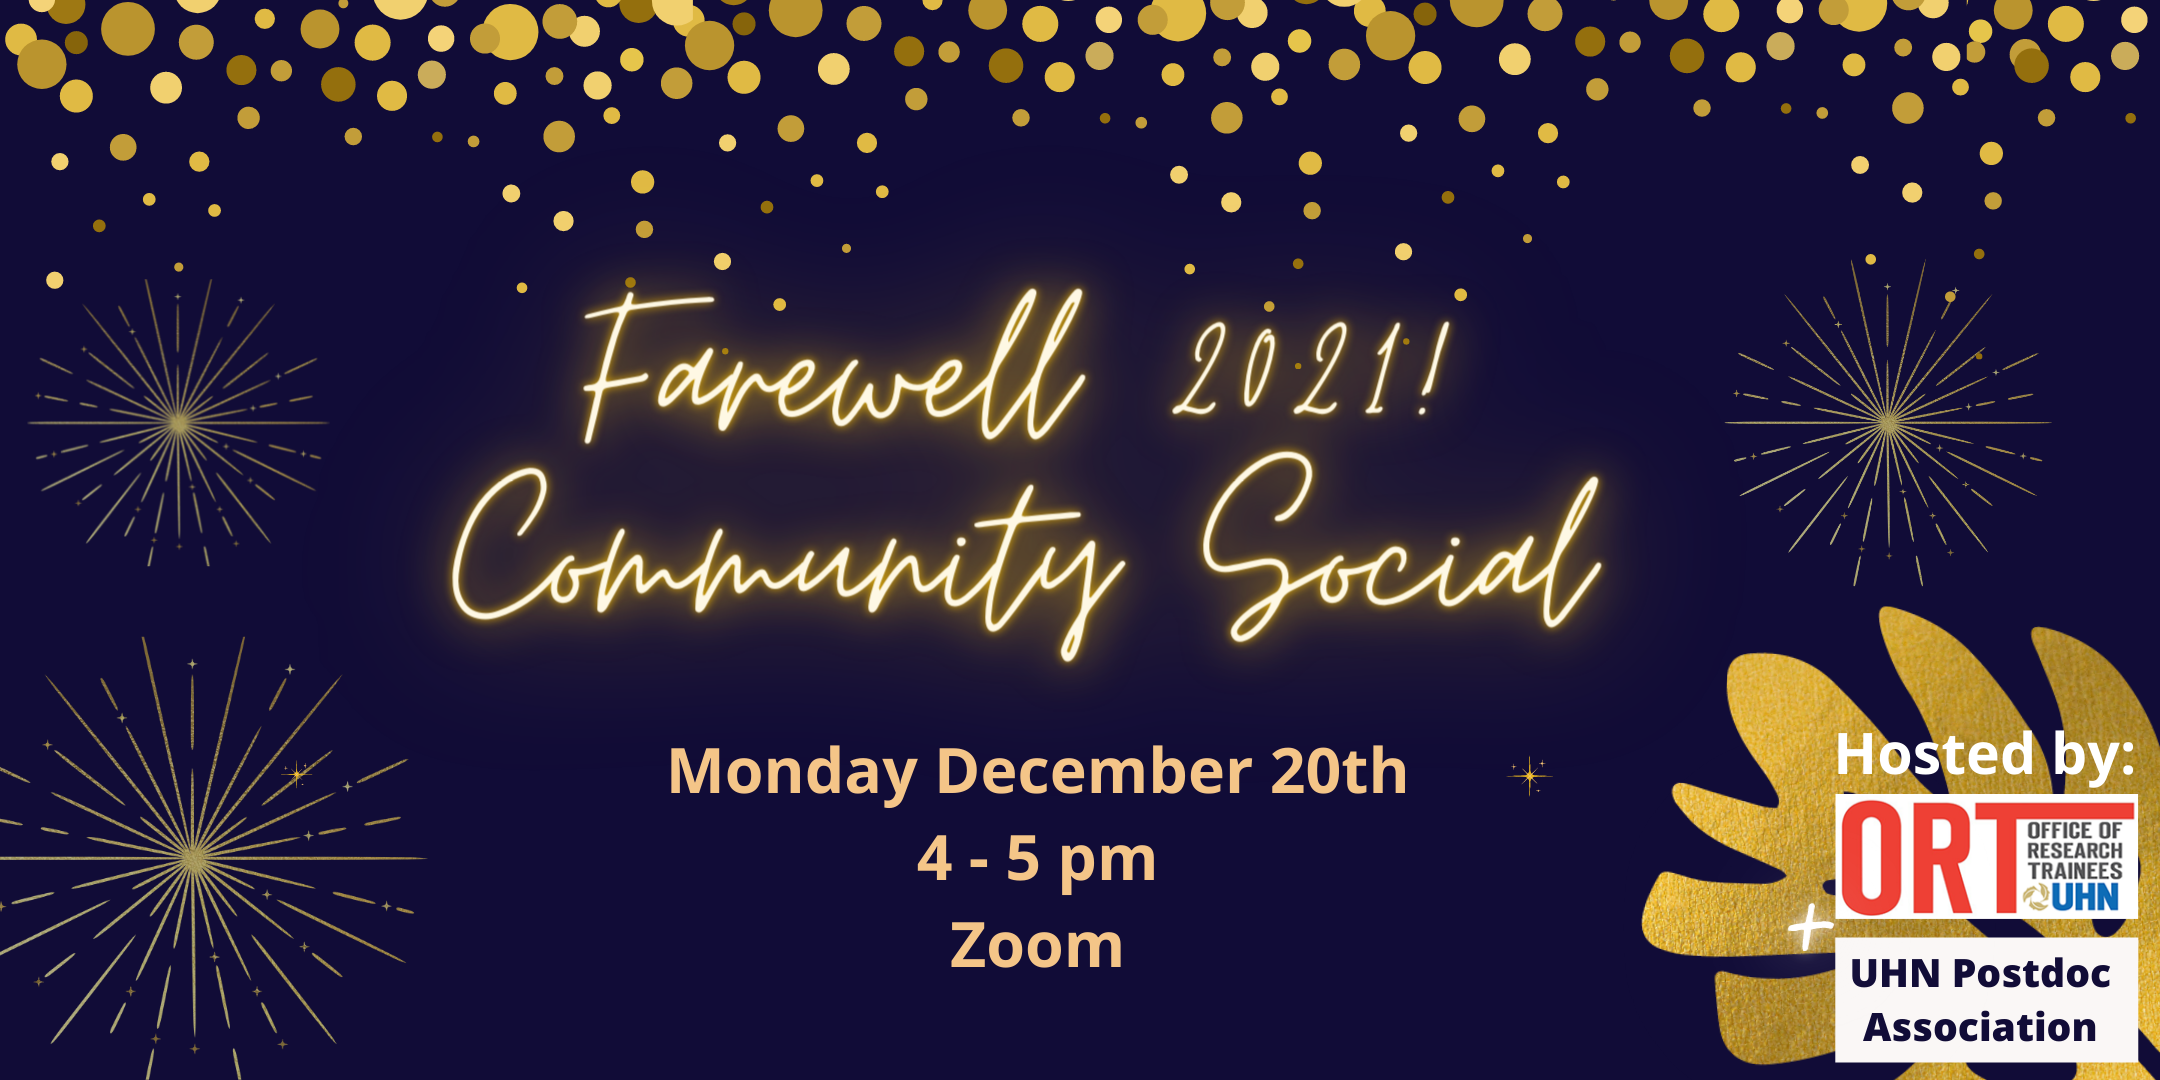 An image with fireworks bordering it saying "Farewell 2021 Community Social" with the date and time of "Monday December 20th from 4 - 5 PM" underneath it. The graphic states the event will be over zoom and that it is hosted by the ORT and UHN Postdocs Association